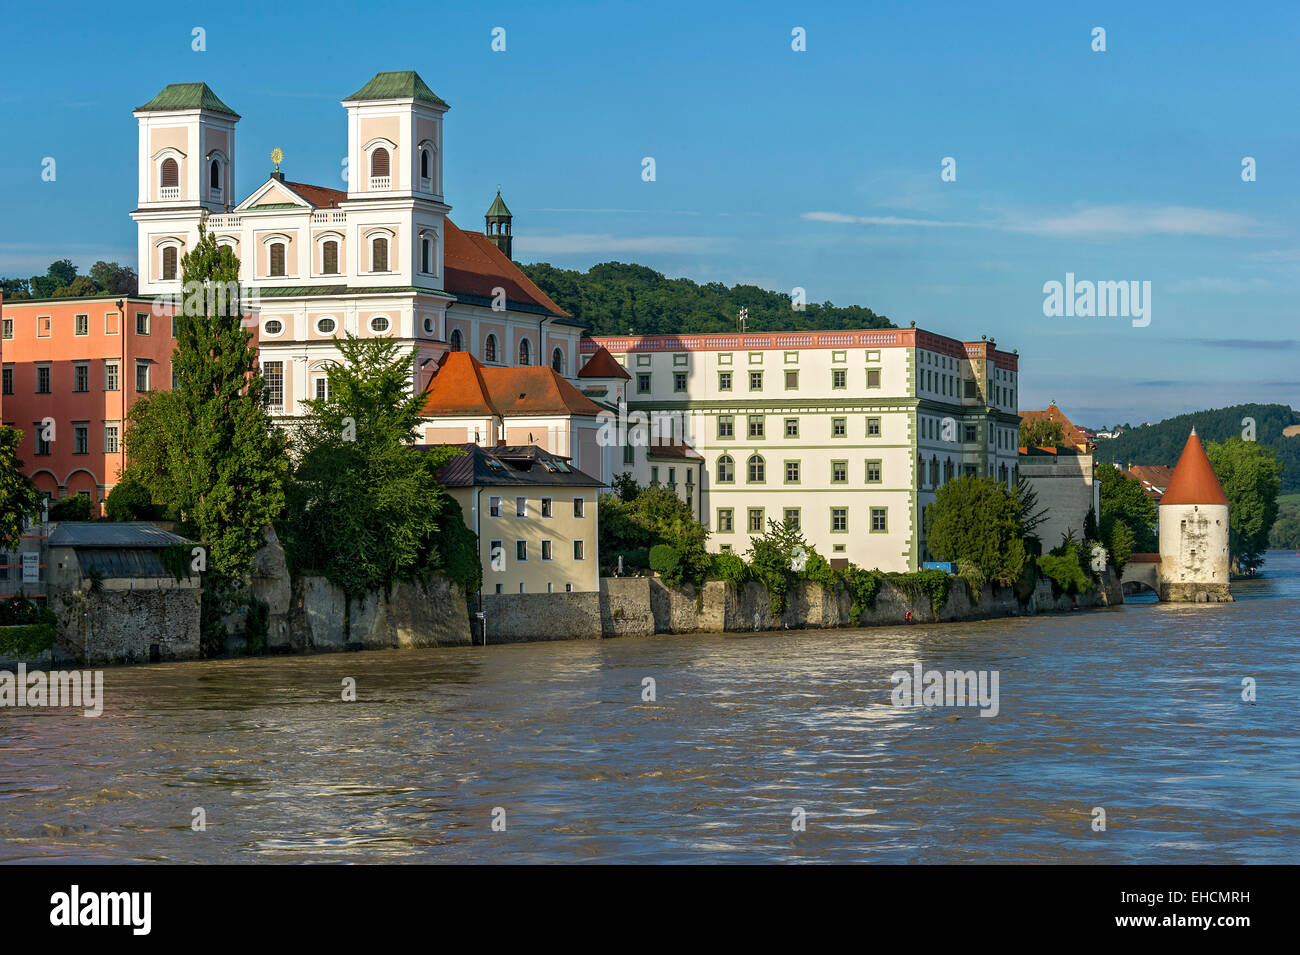 Jesuit Church of St. Michael, Schaiblingsturm tower, flooded promenade of the Inn river during high water, Innkai waterfront Stock Photo